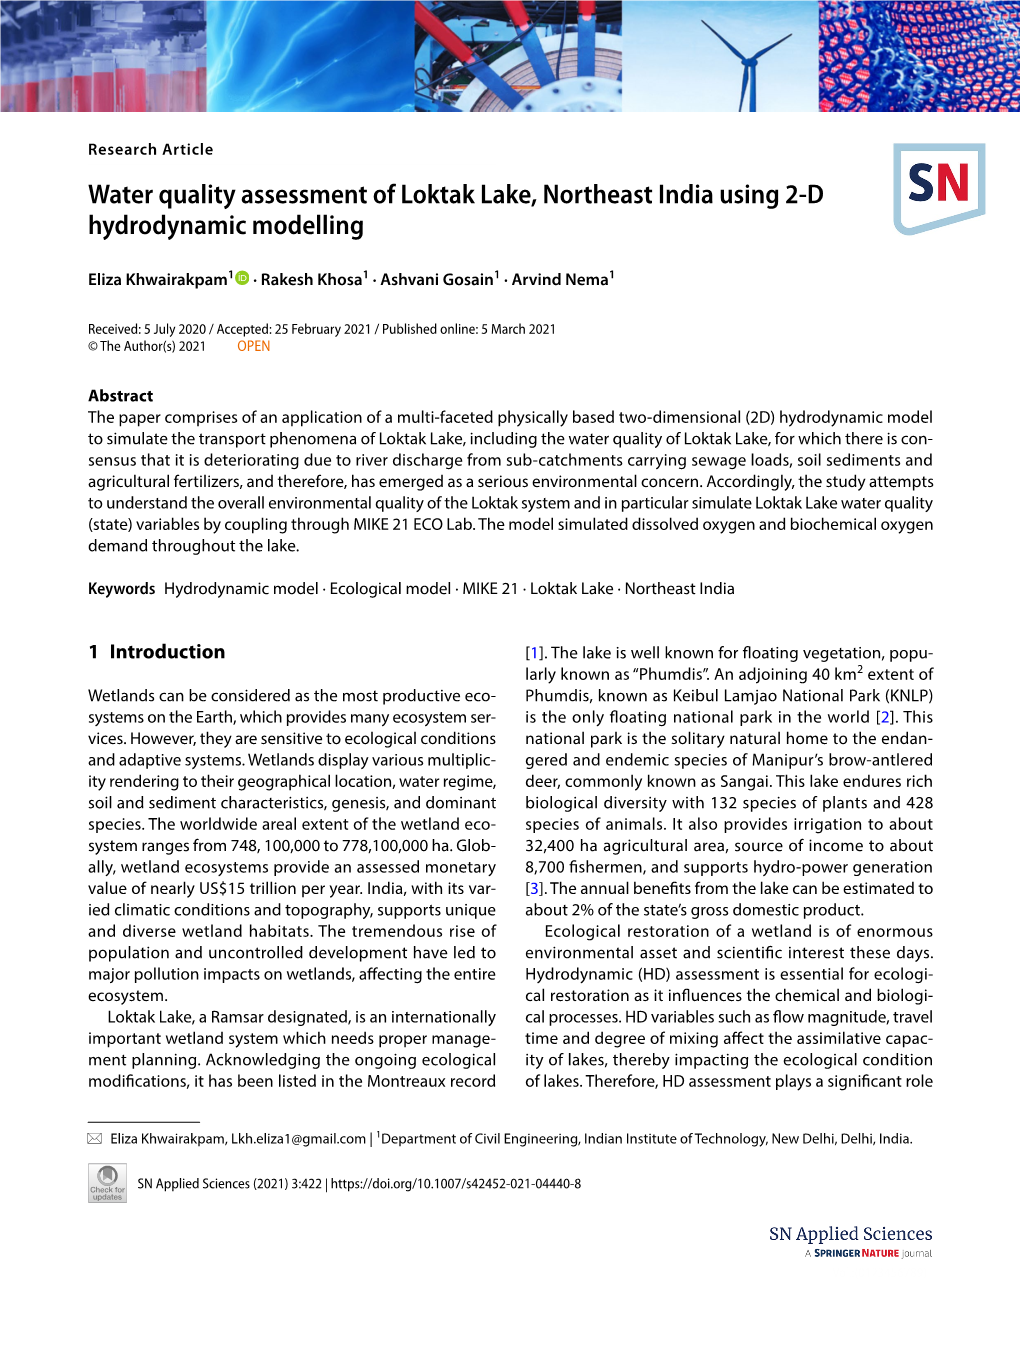 Water Quality Assessment of Loktak Lake, Northeast India Using 2-D Hydrodynamic Modelling